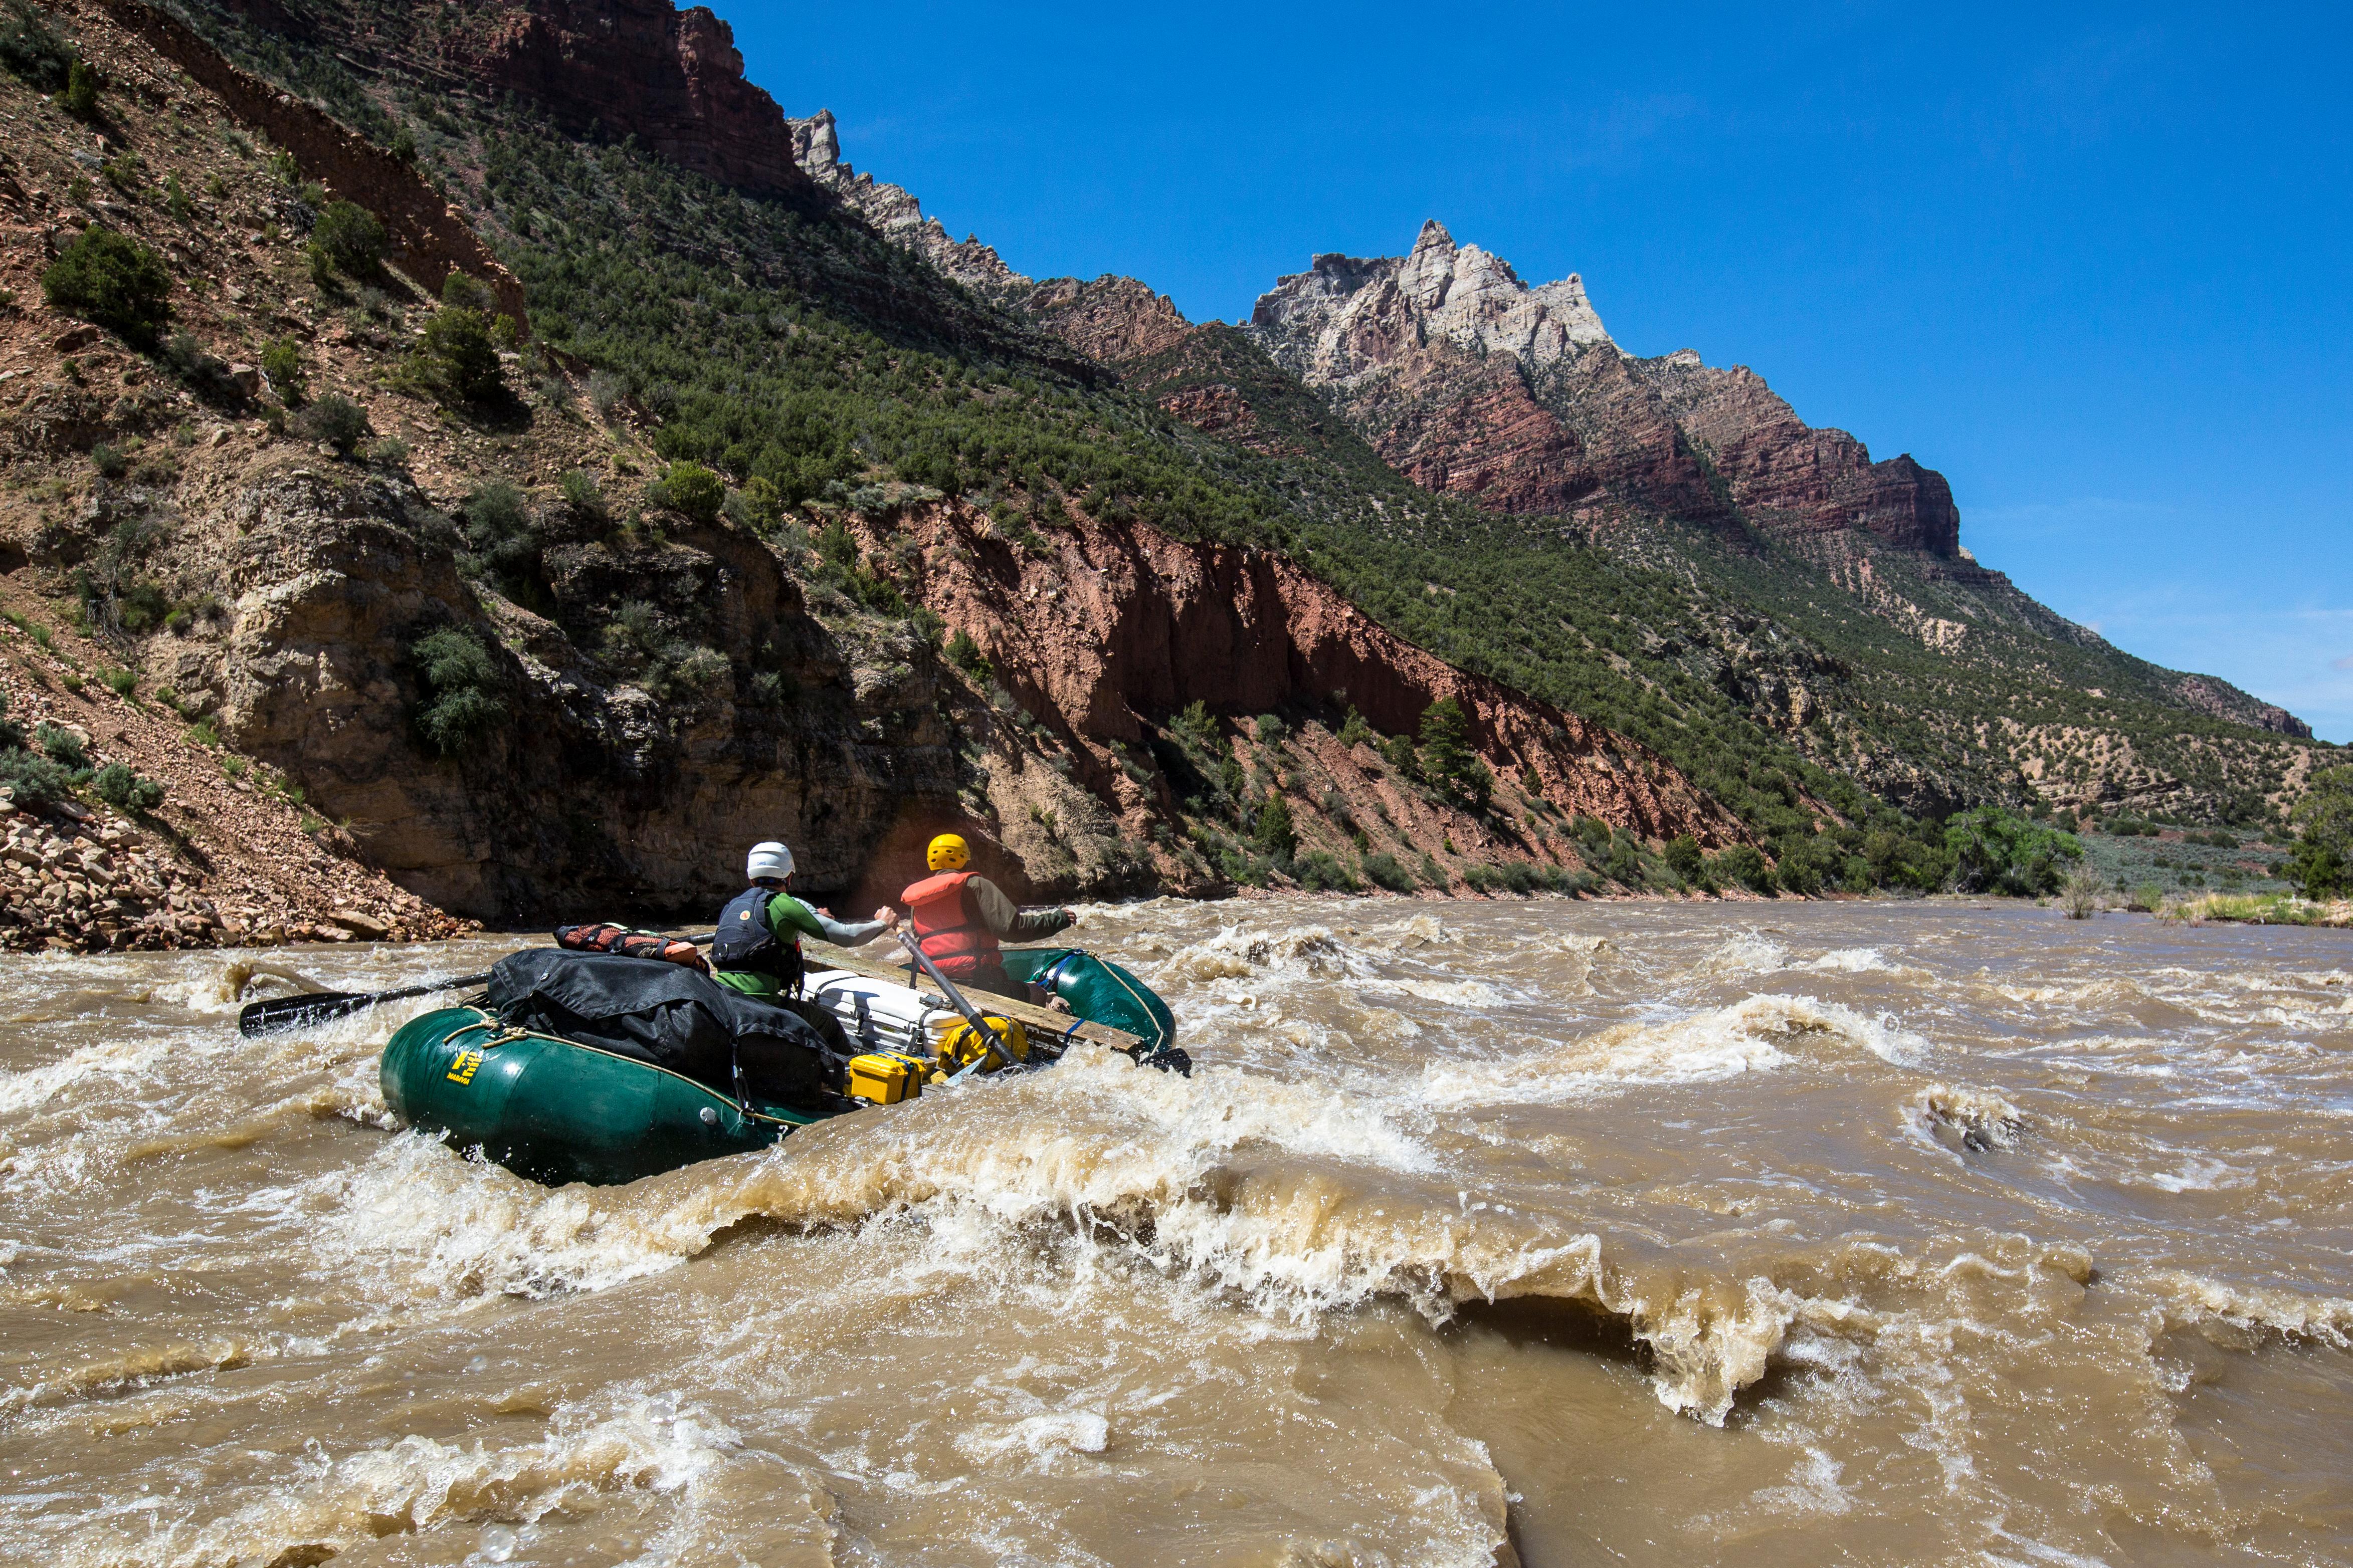 A green rubber raft floats over a rapid on a brown colored river in front of multi-colored mountains